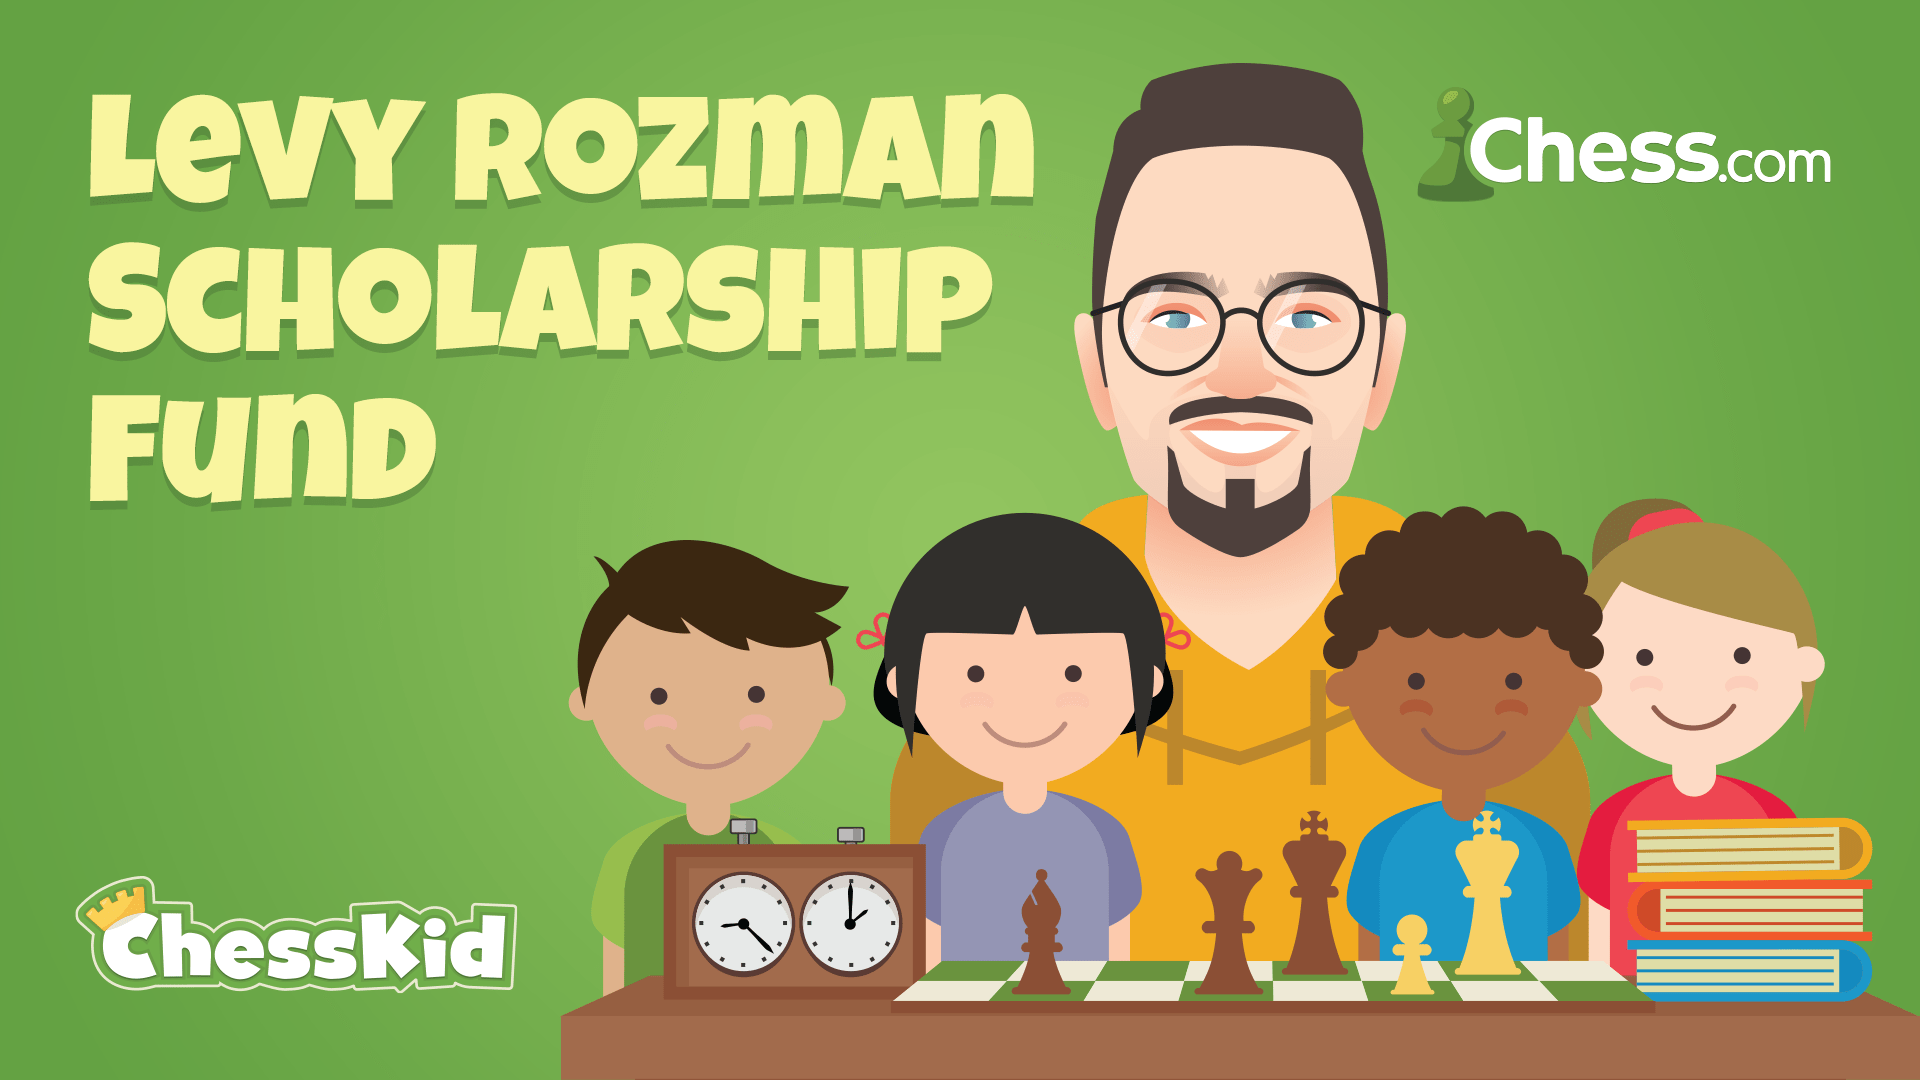 IM Levy Rozman Partners With ChessKid.com To Offer Chess Scholarship Fund